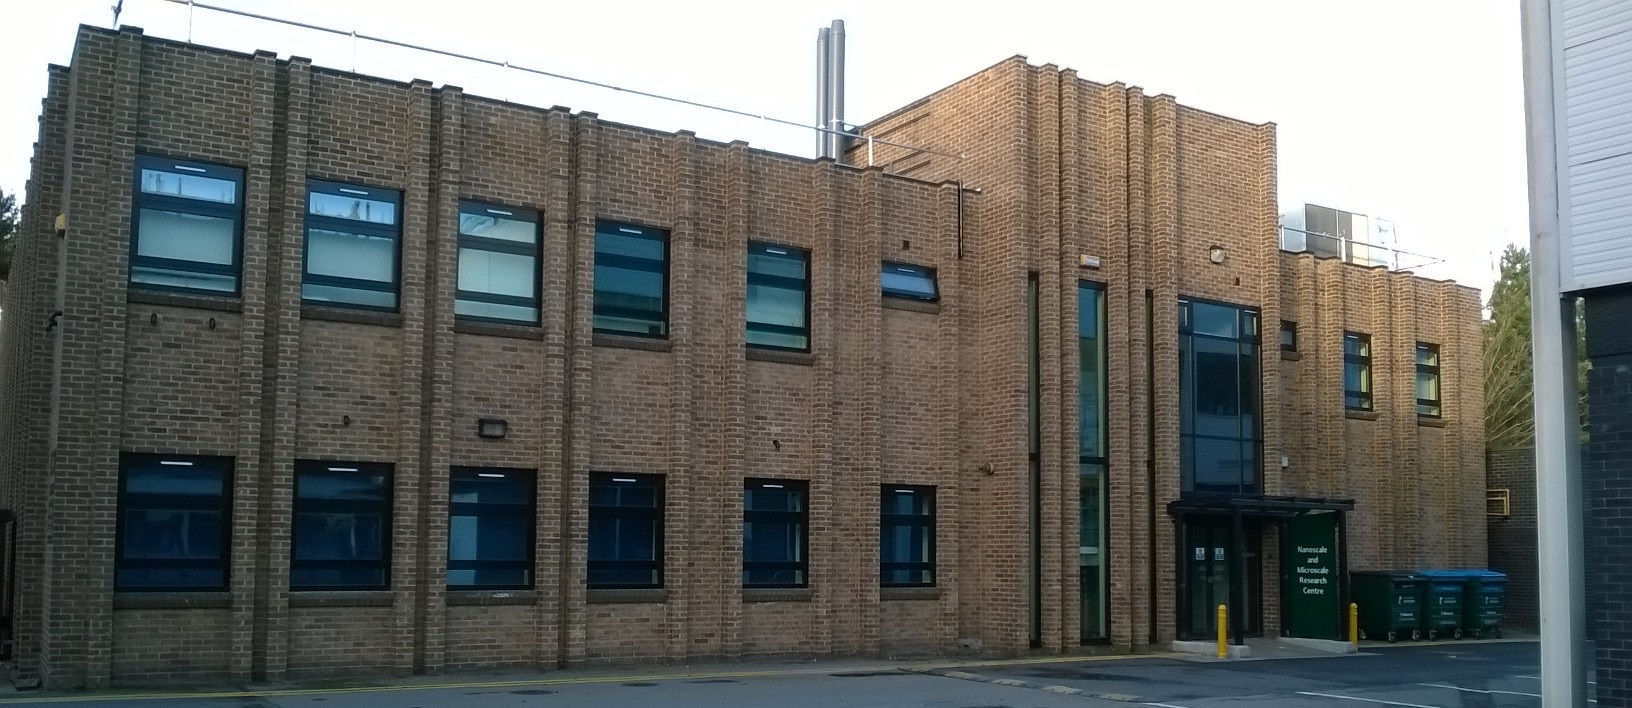 Cripps South Building